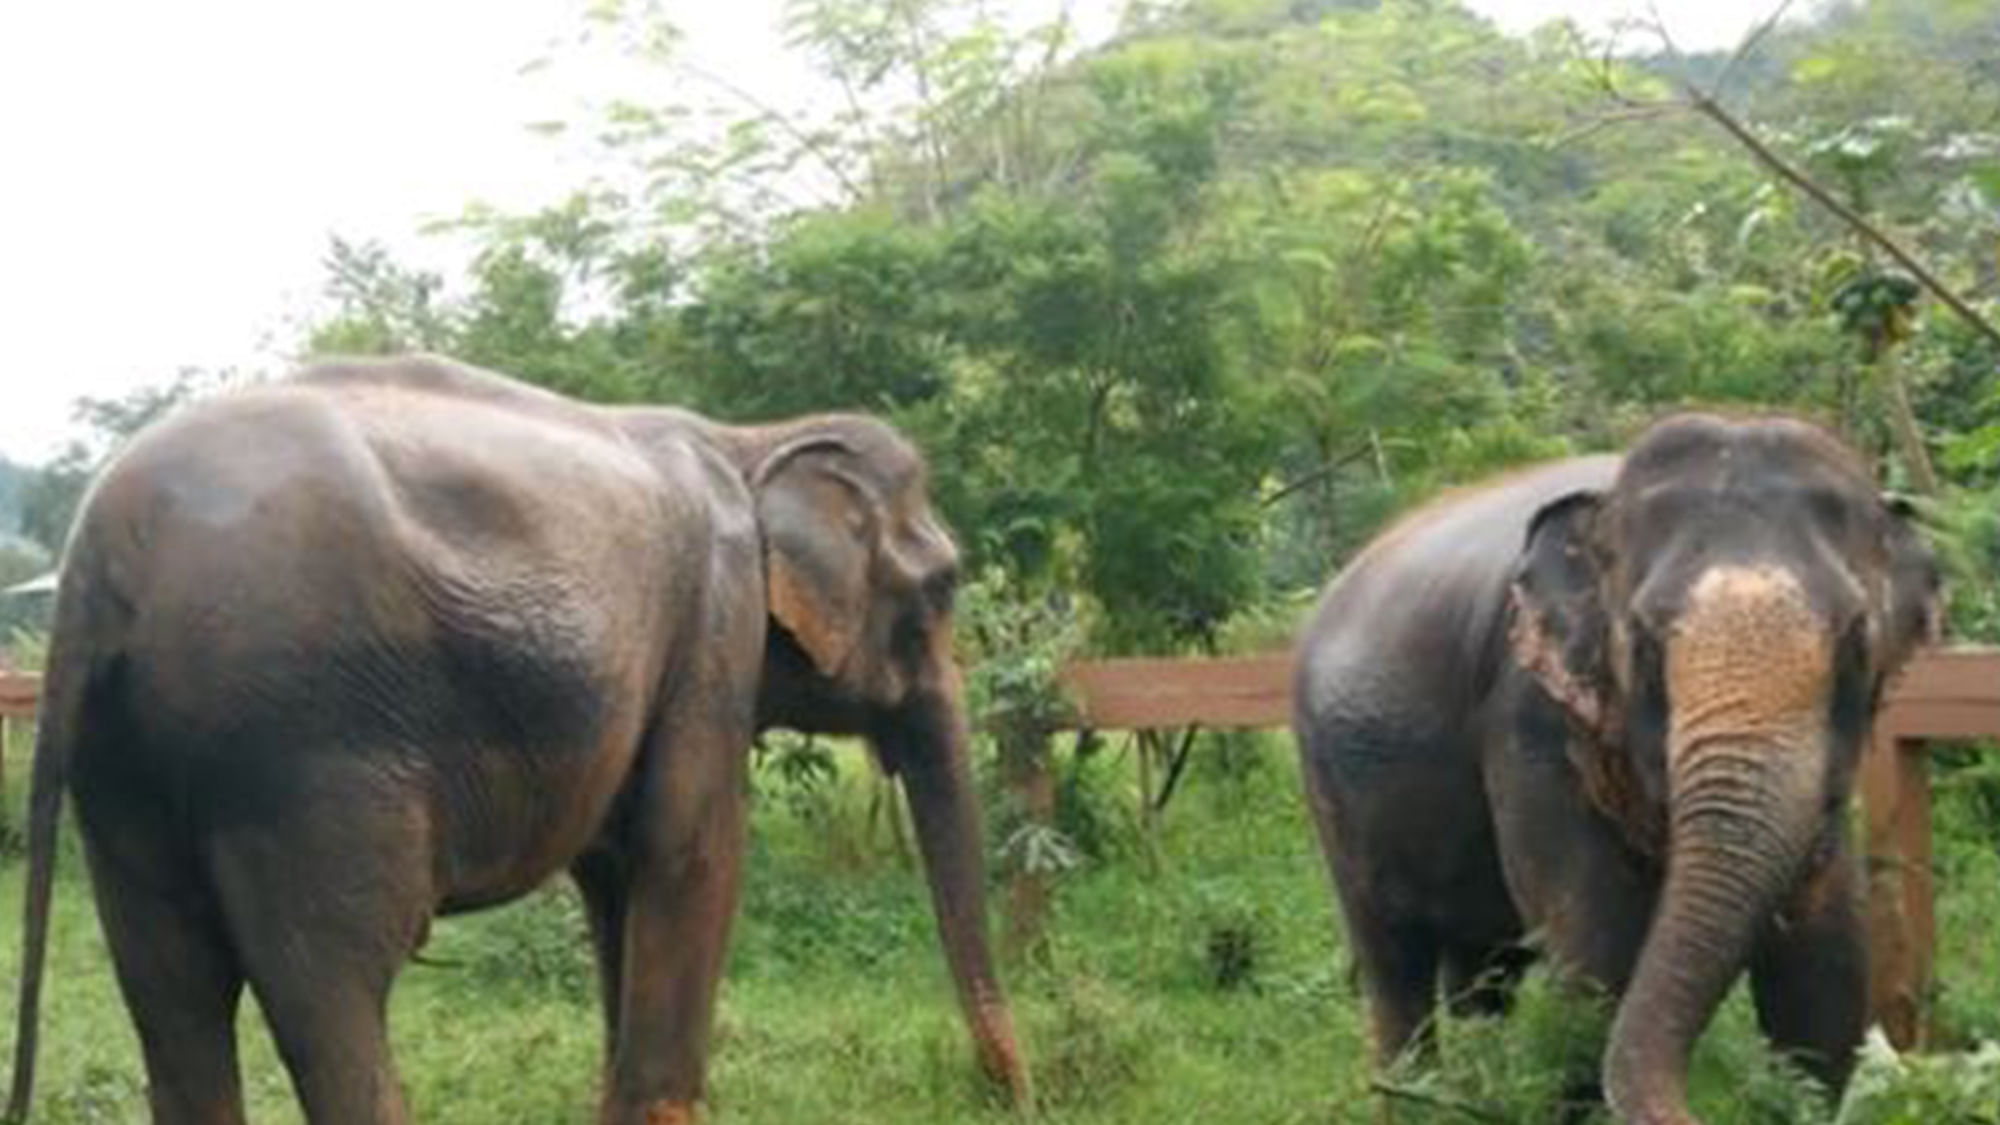 

The elephants are now safe away from captivity. (Photo: AP Screengrab)